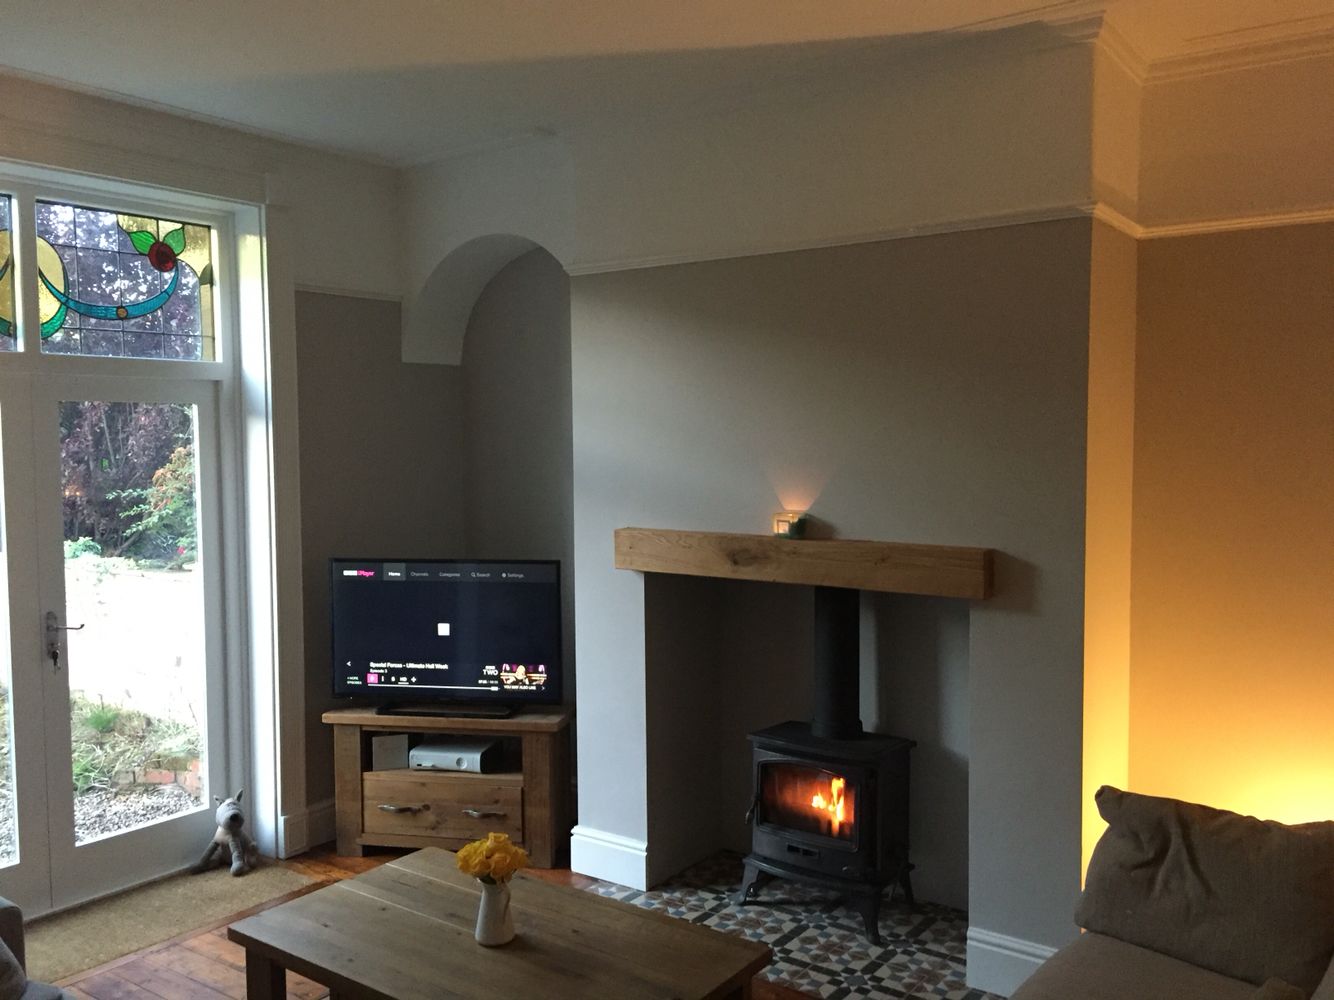 Restoring Brick Fireplace New Wood Burning Stove and Tiled Hearth Brick Fireplace Has